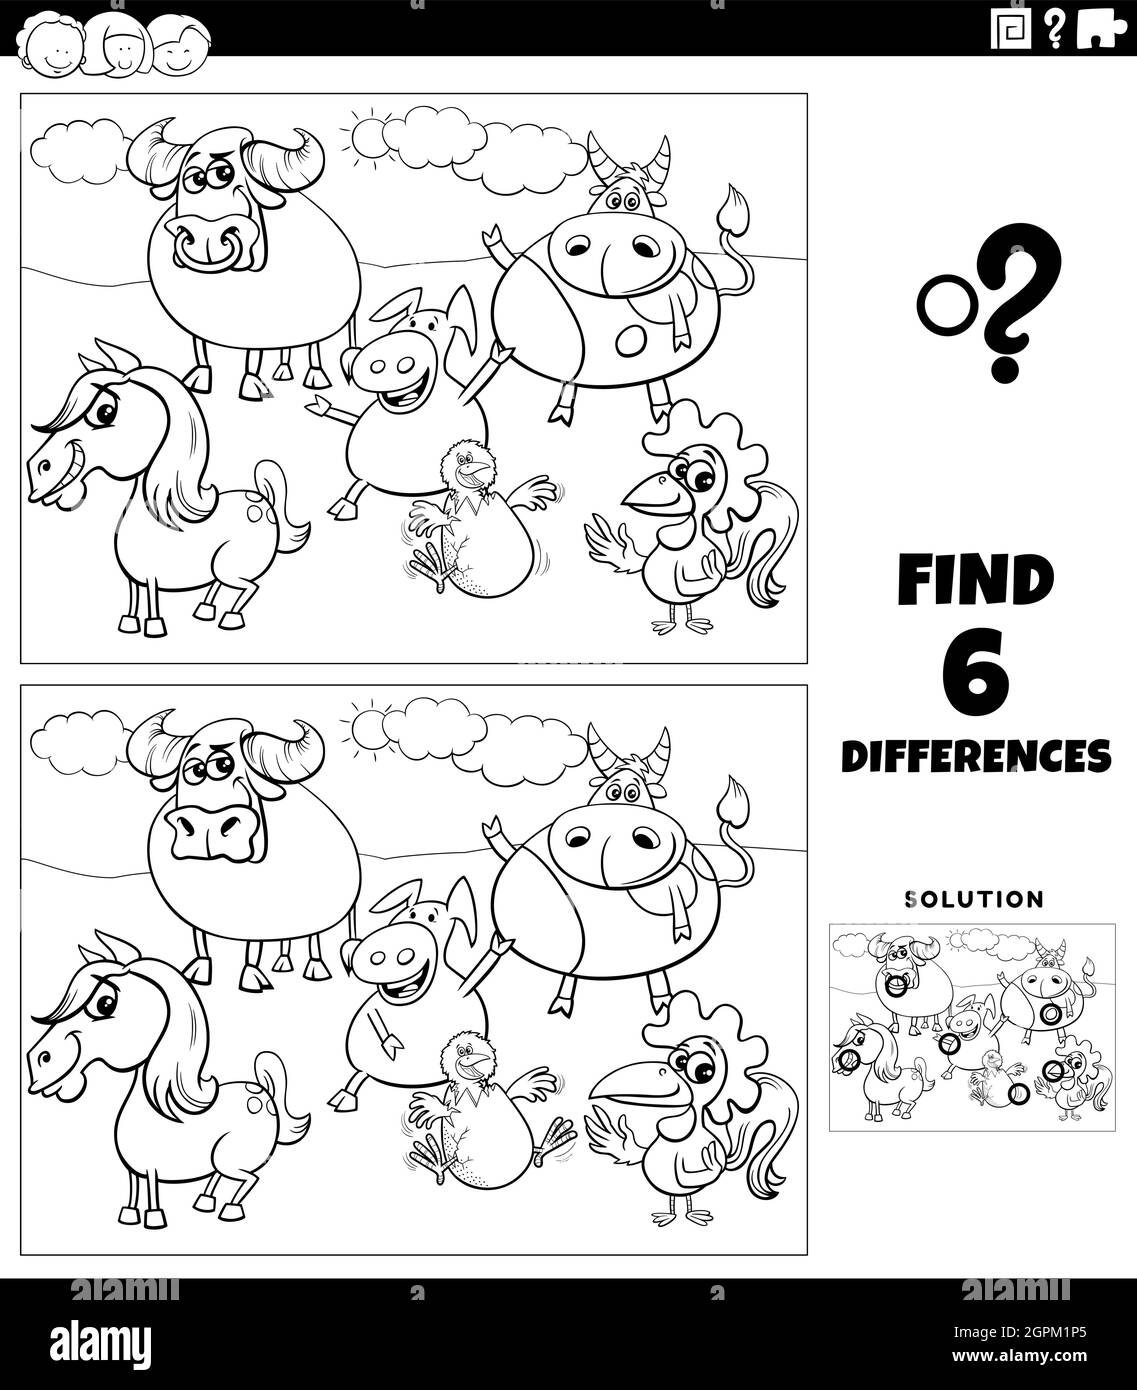 differences game with farm animals coloring book page Stock Vector ...